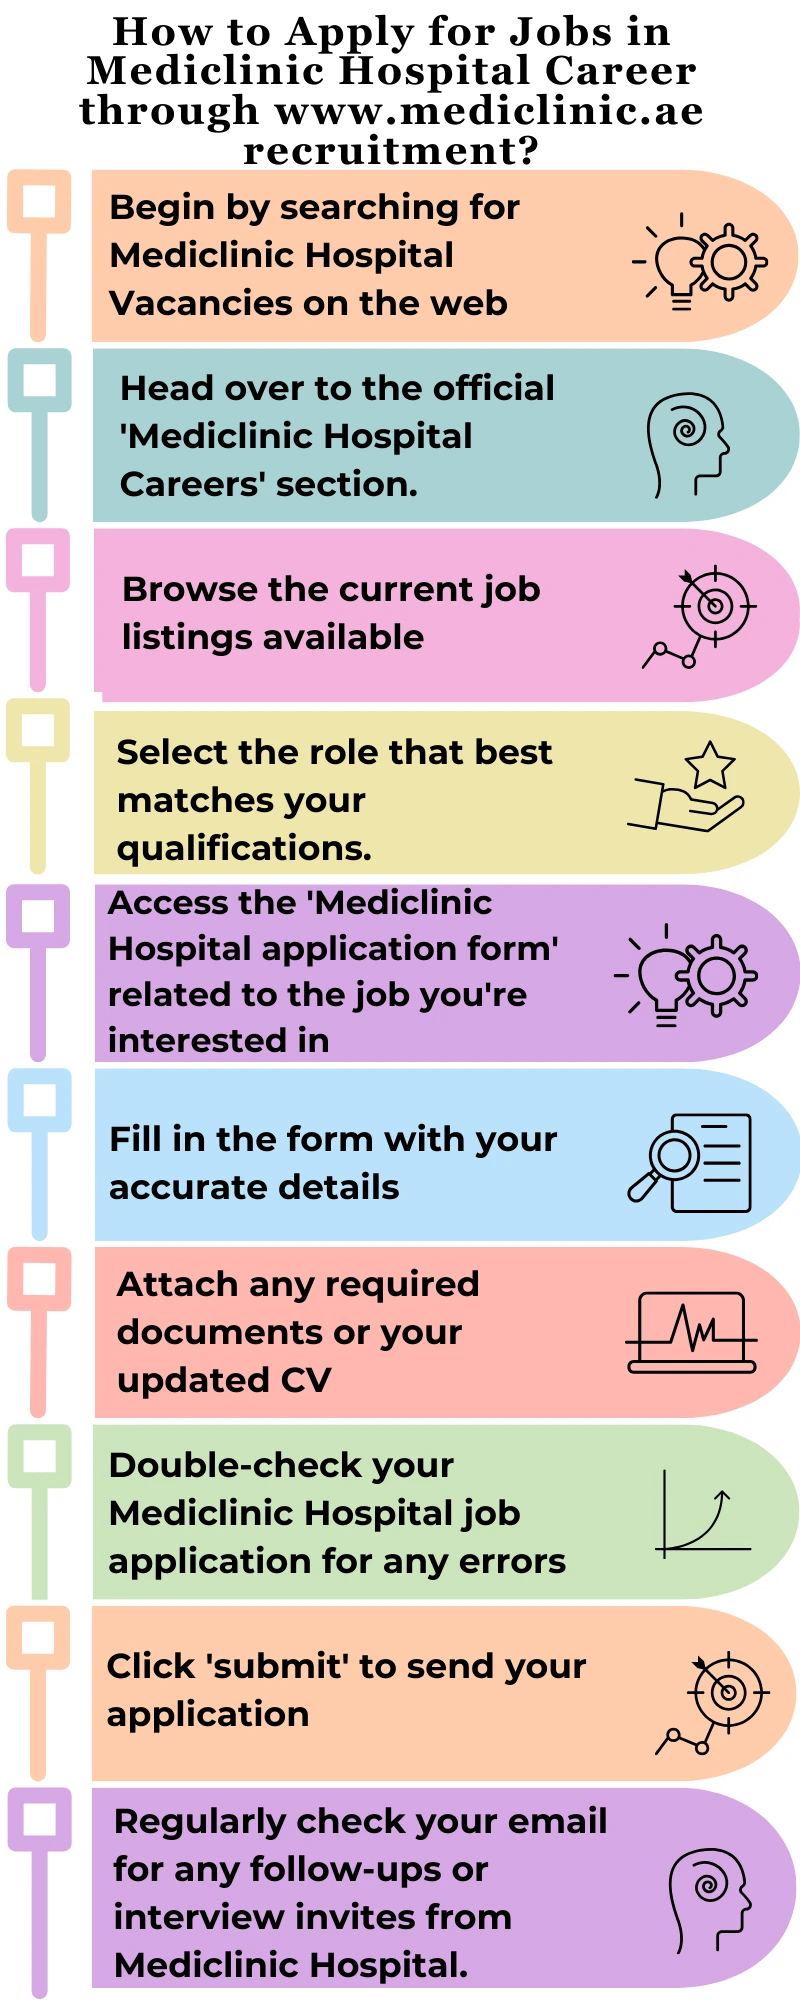 How to Apply for Jobs in Mediclinic Hospital Career through www.mediclinic.ae recruitment?